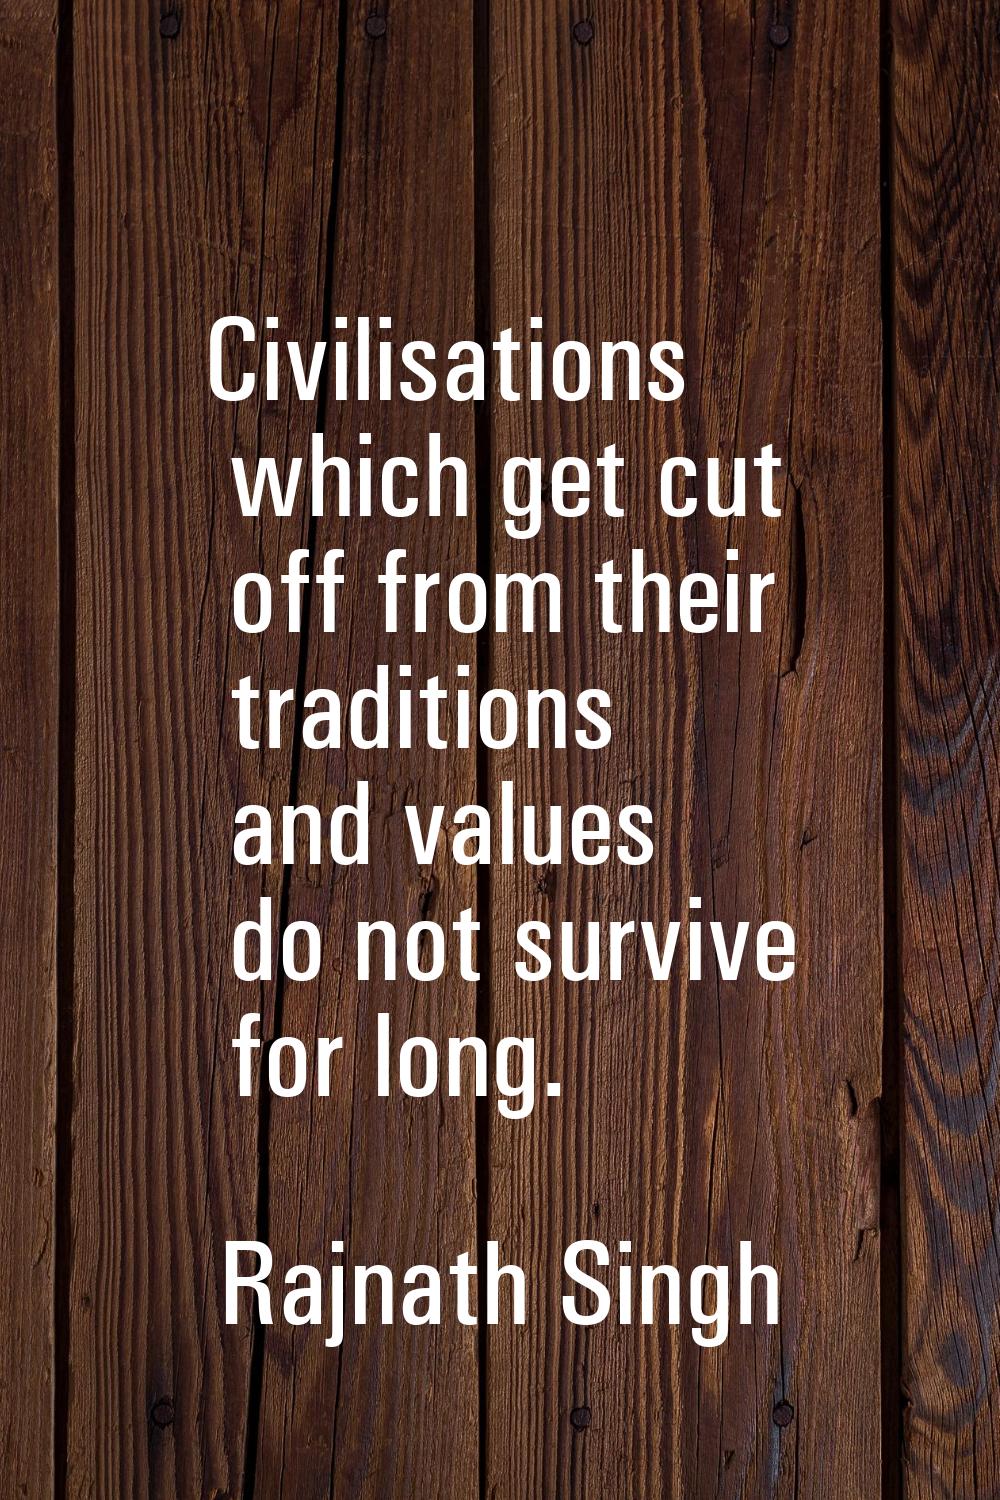 Civilisations which get cut off from their traditions and values do not survive for long.